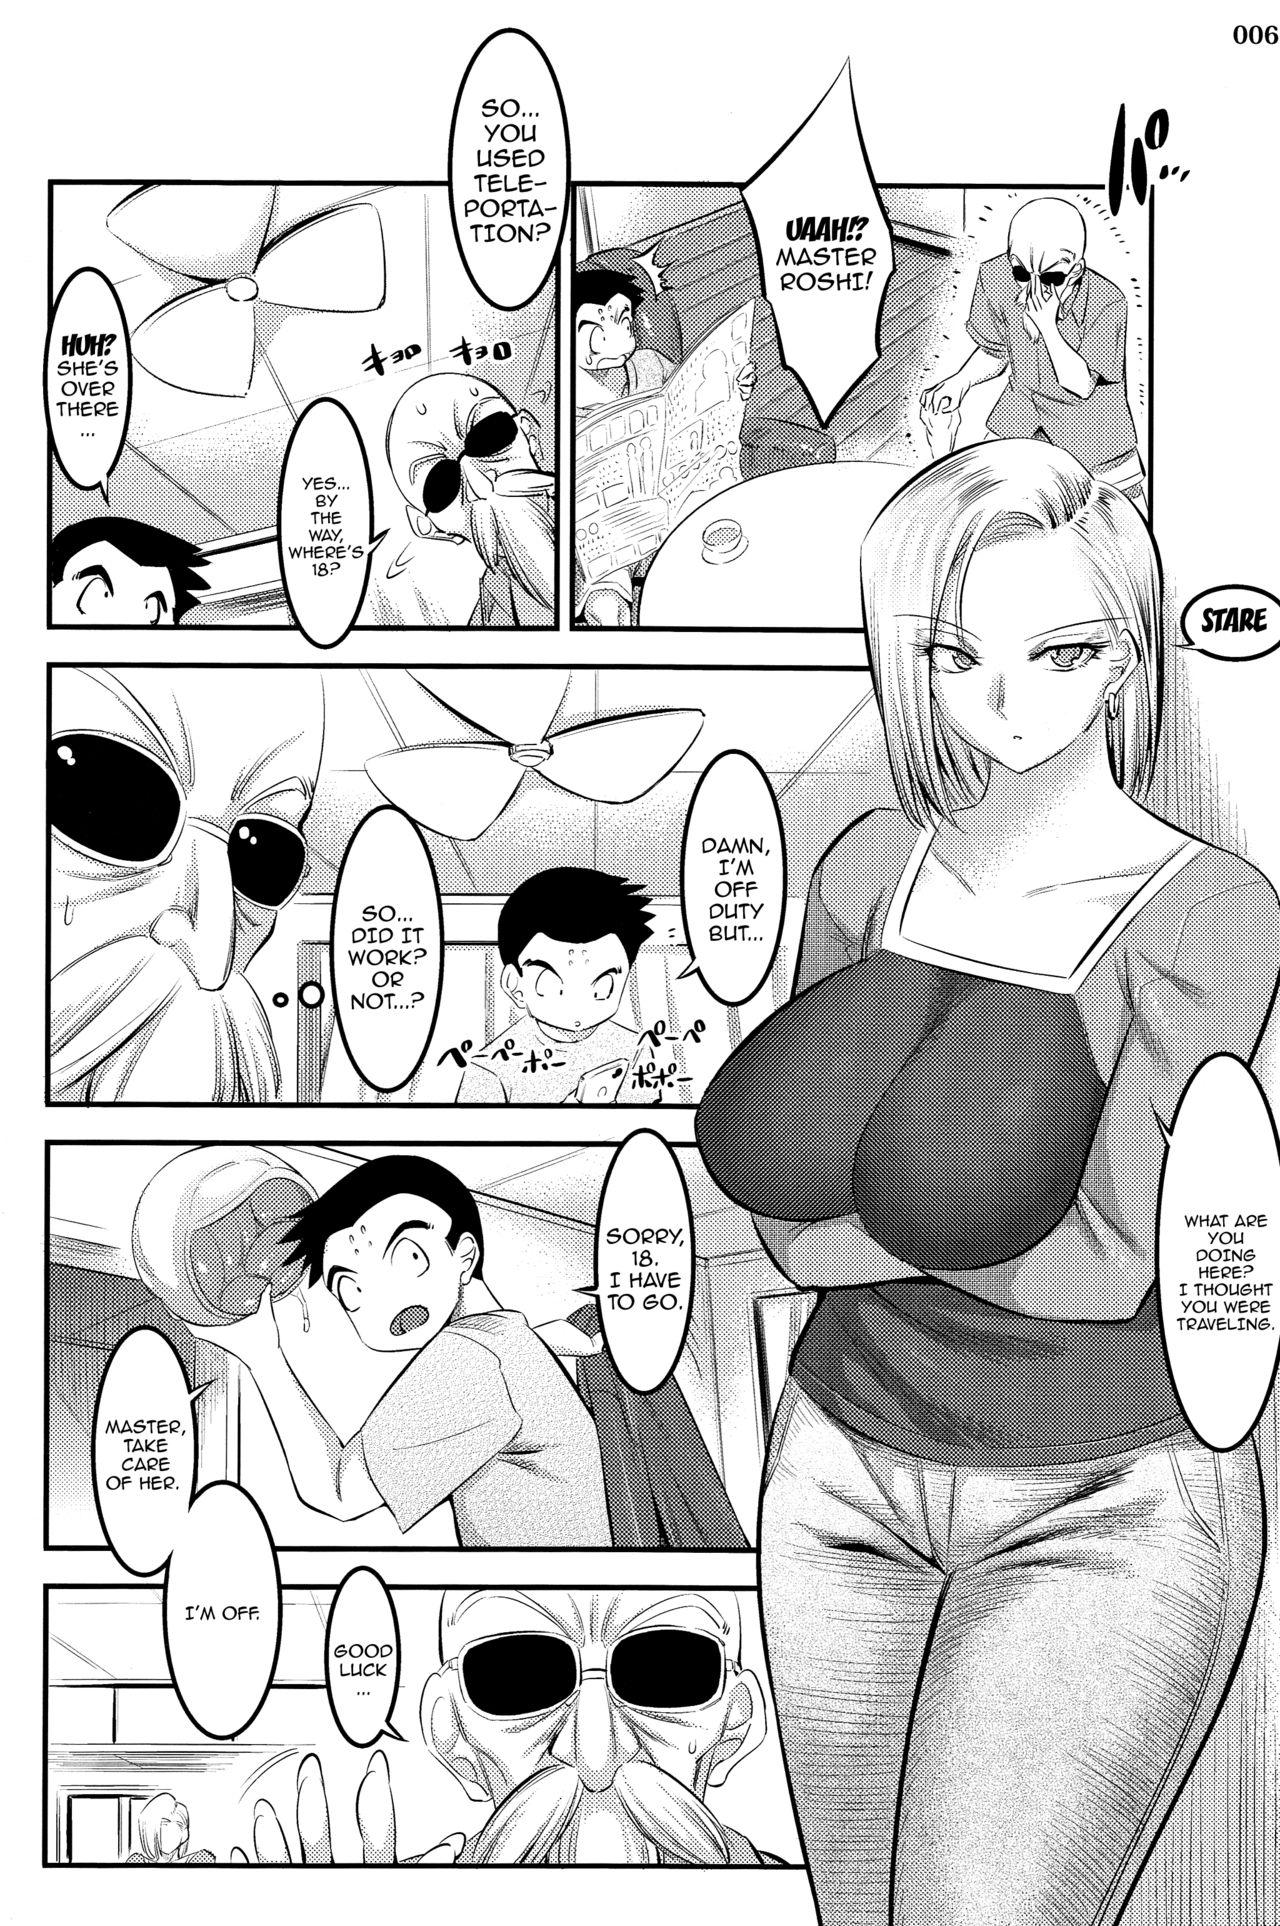 Masturbating A Story About How Android 18 Squeezes Me Dry Everyday - Dragon ball z Strange - Page 5